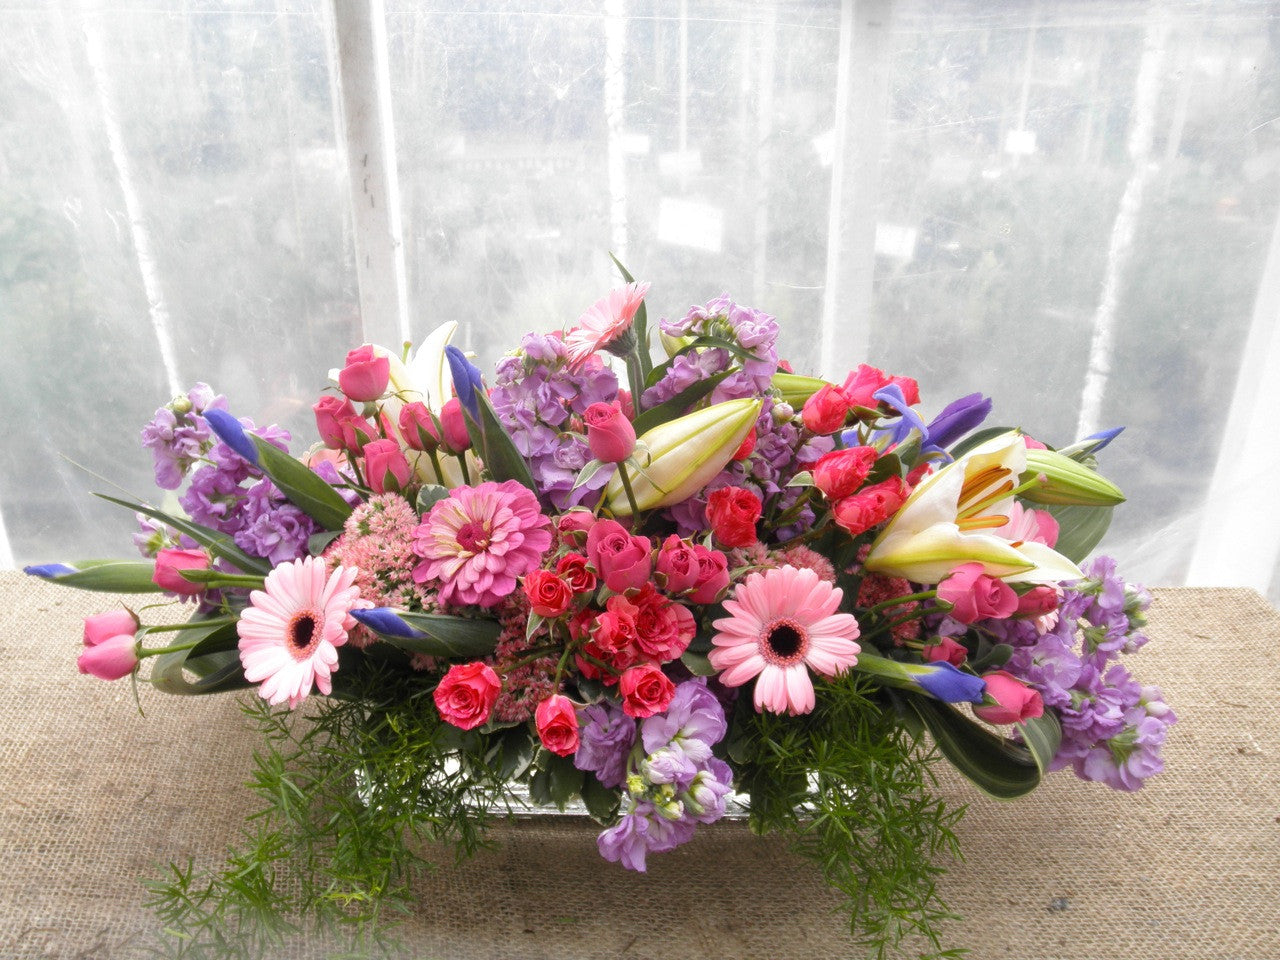 Easter flowers with pink and lavender | Michler's Florist